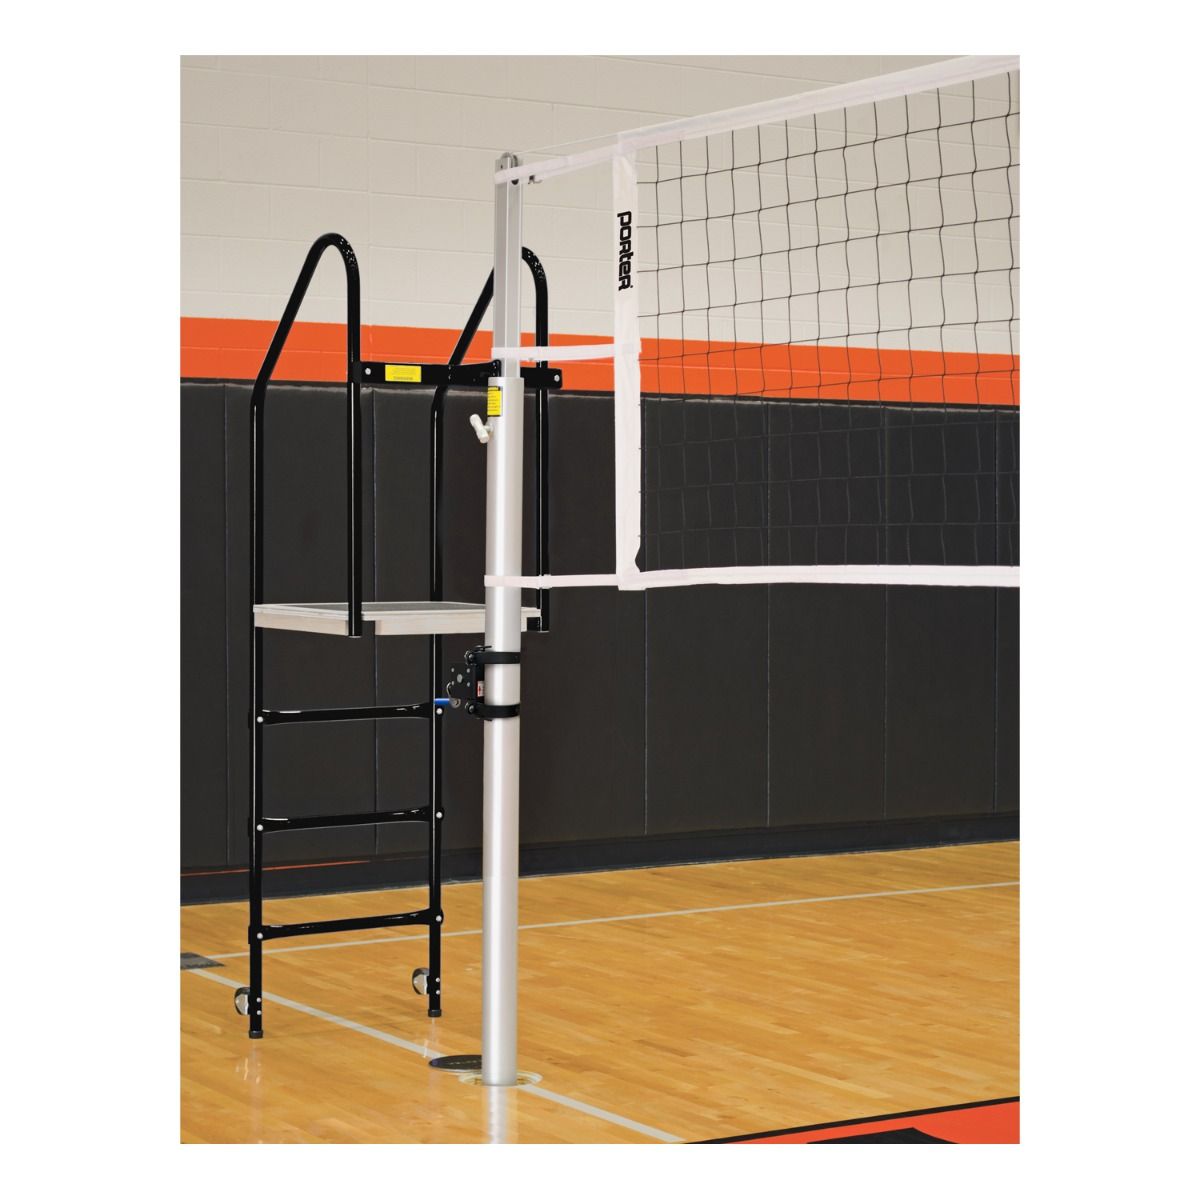 Gill Athletics Fitted Judges Stand